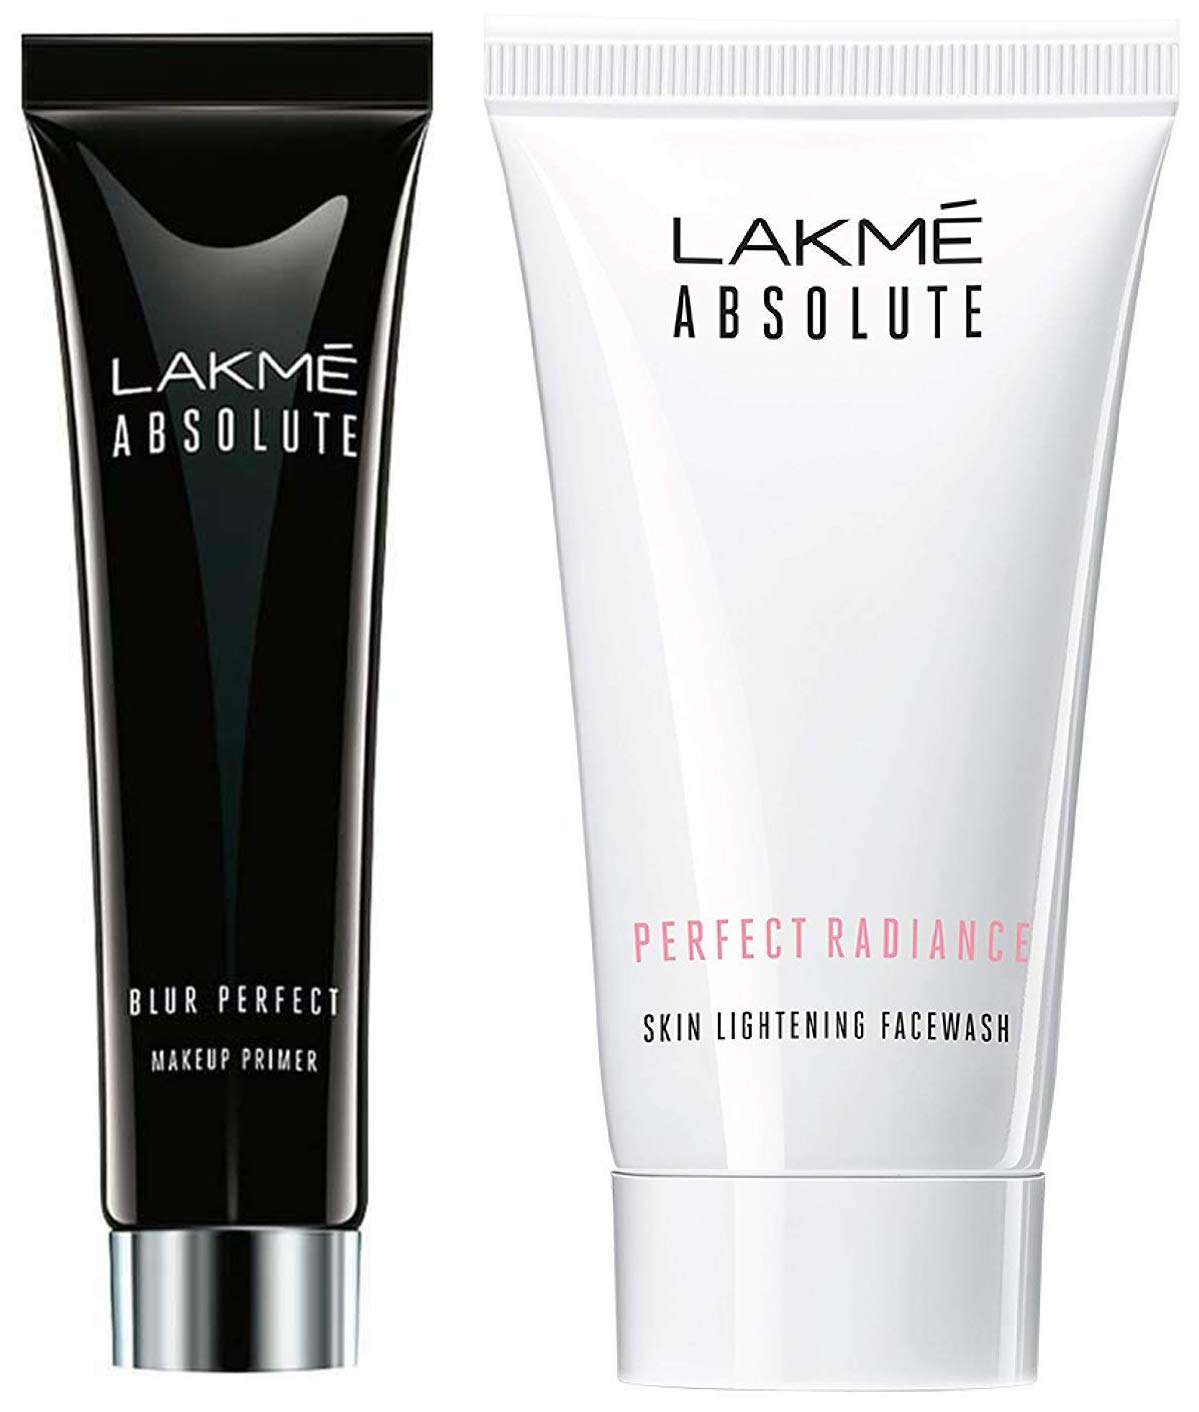 Buy Lakme Absolute Blur Perfect Makeup Primer 30g And Lakme Absolute Perfect Radiance Skin Lightening Facewash 50g Online At Low Prices In India Amazon In